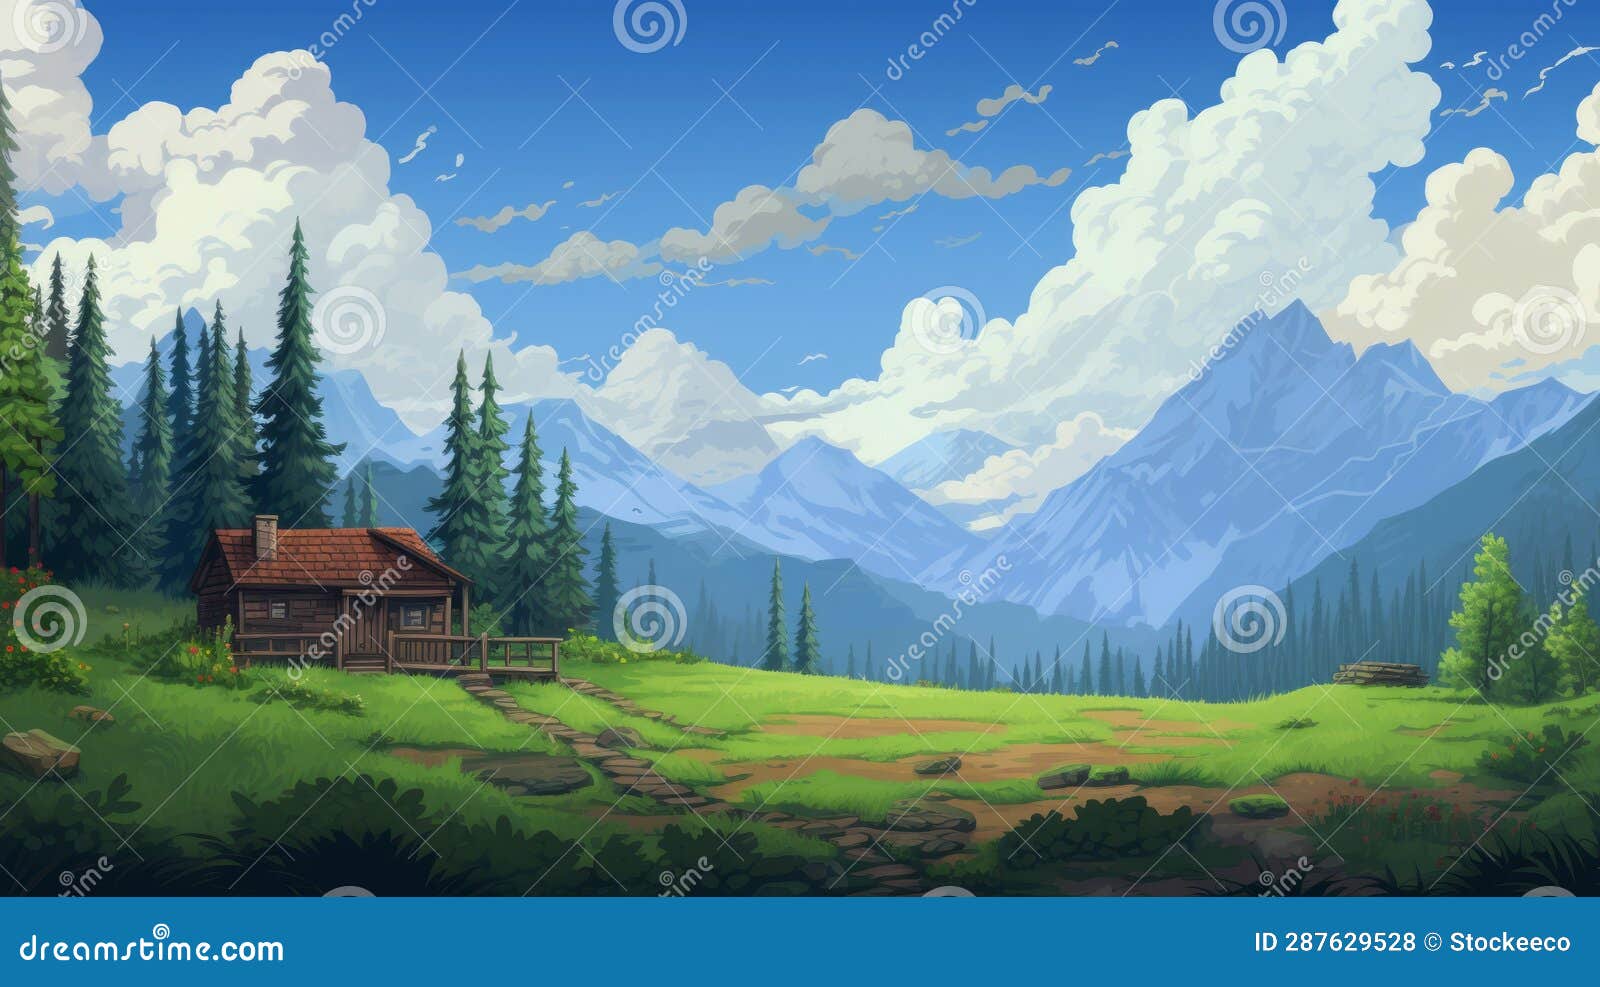 Wallpaper Anime, Winter, Blue, Atmosphere, Mountain, Background - Download  Free Image